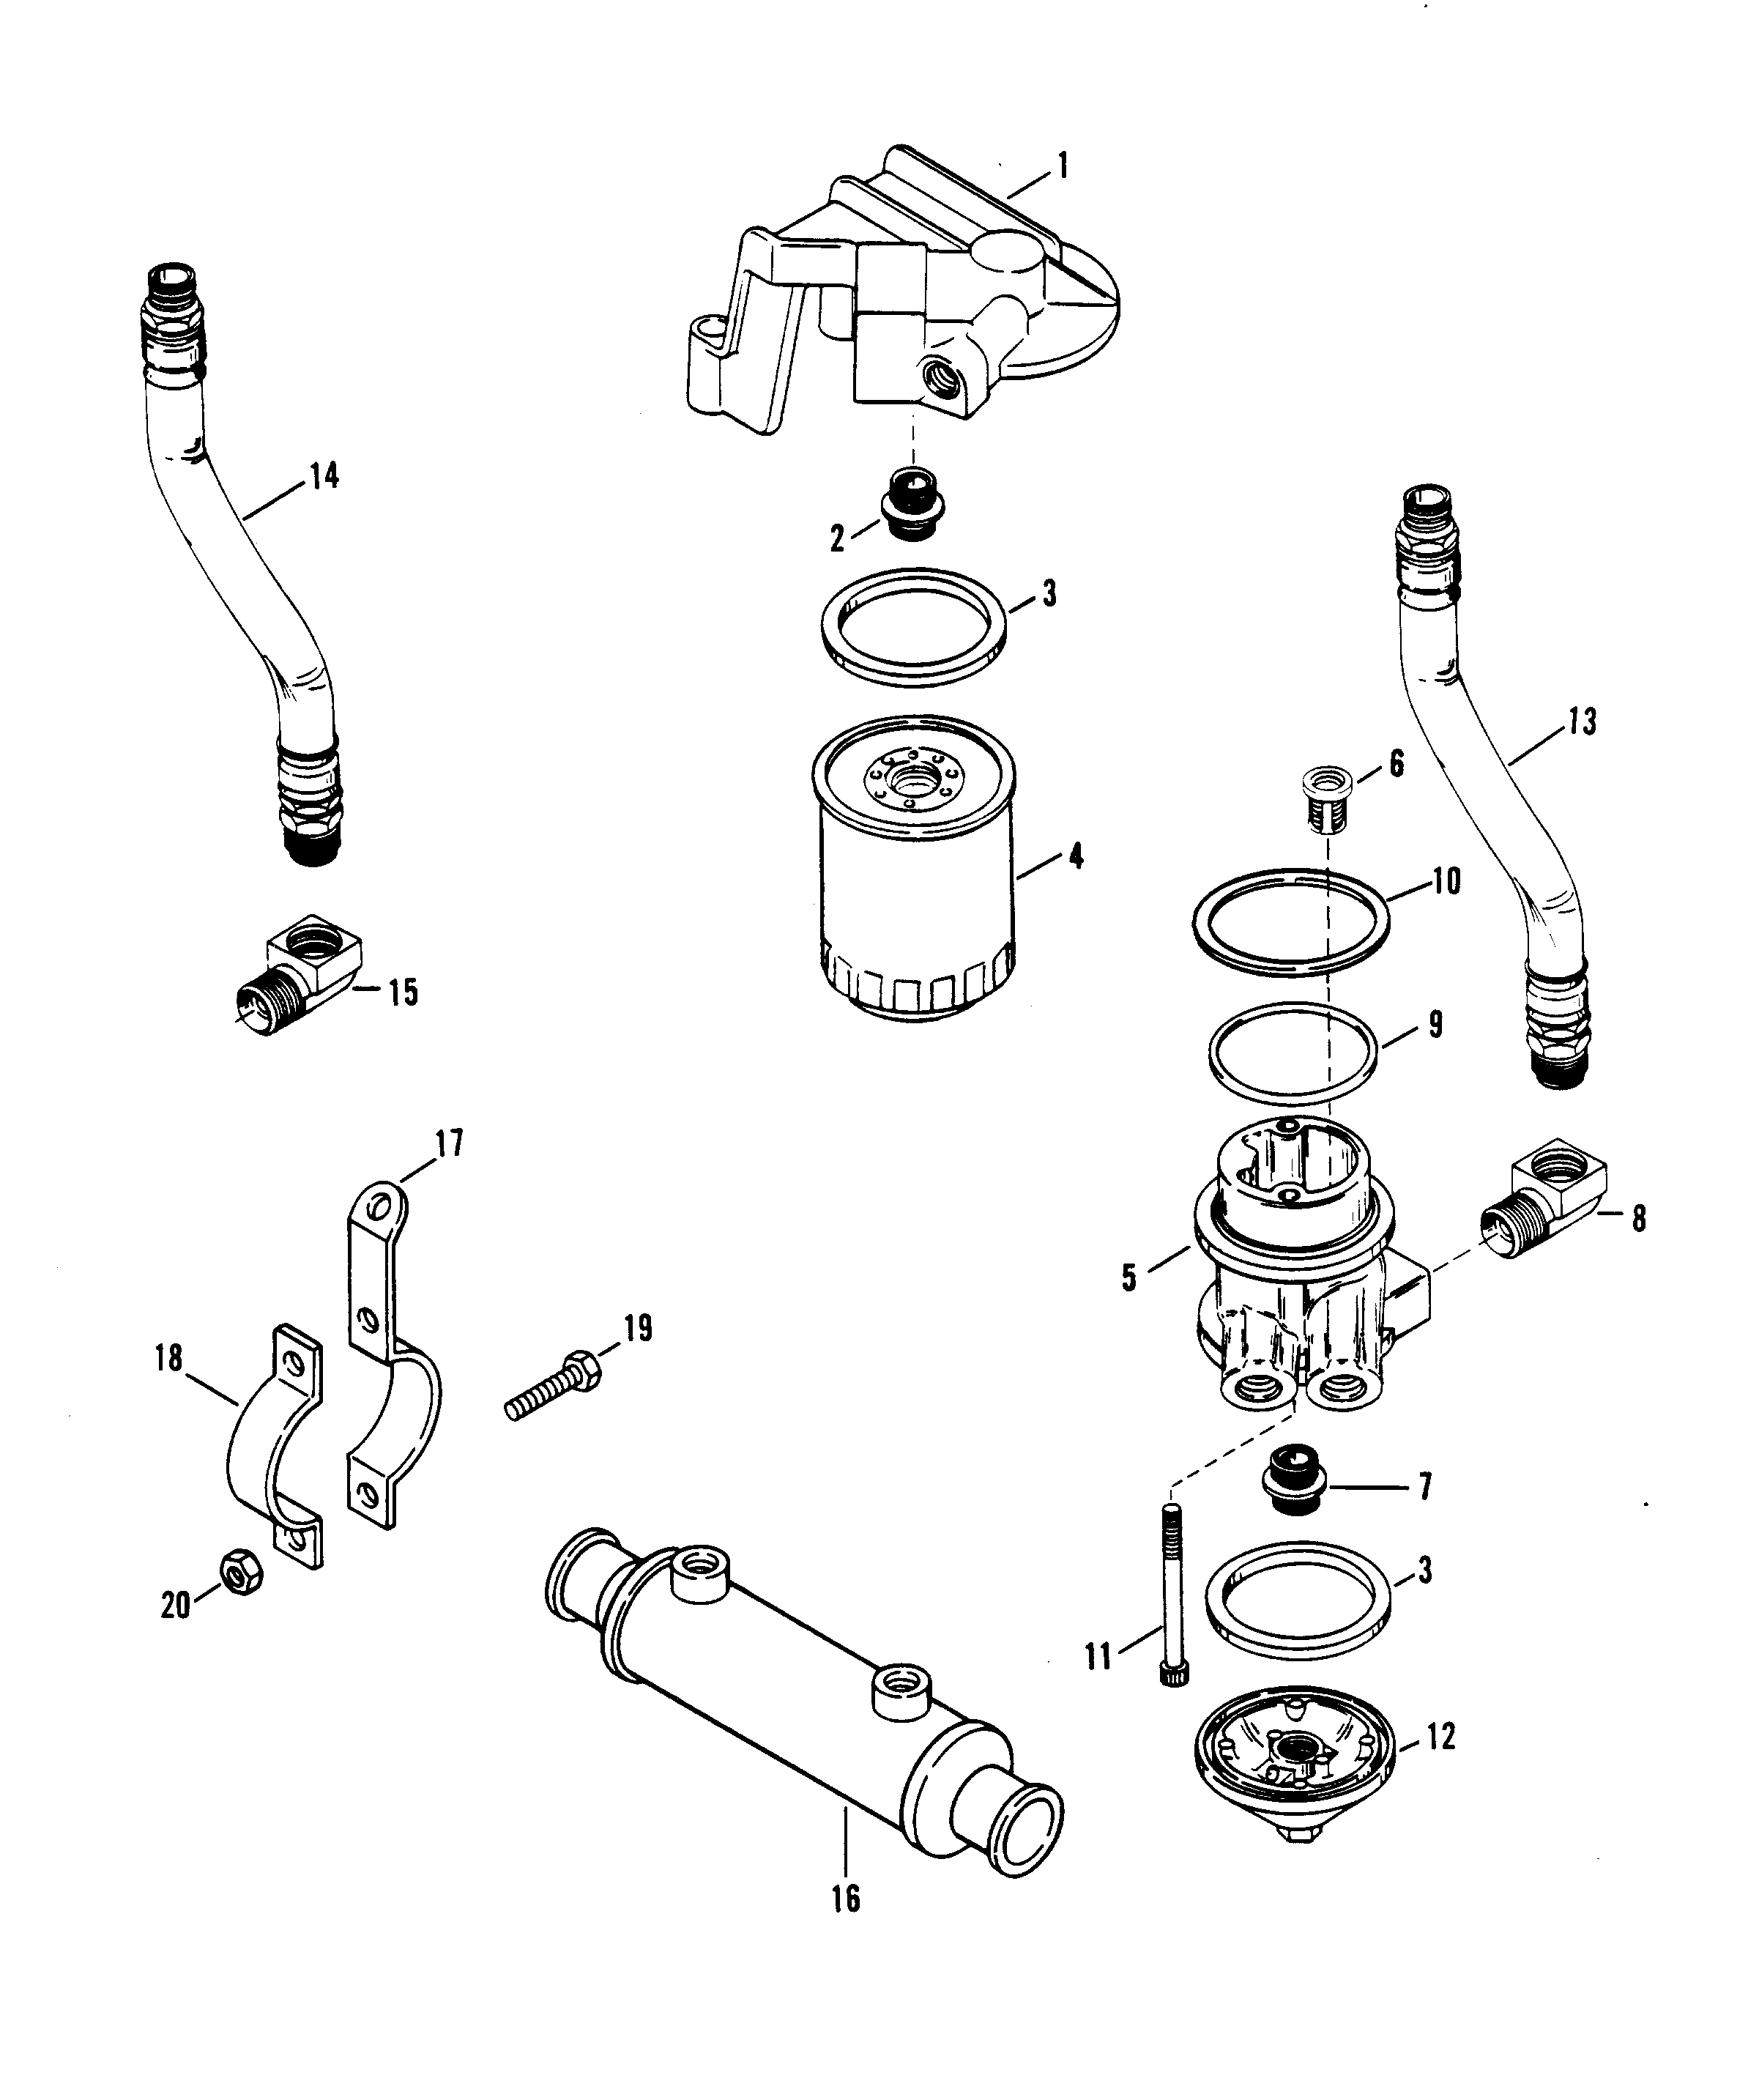 OIL FILTER AND ADAPTOR